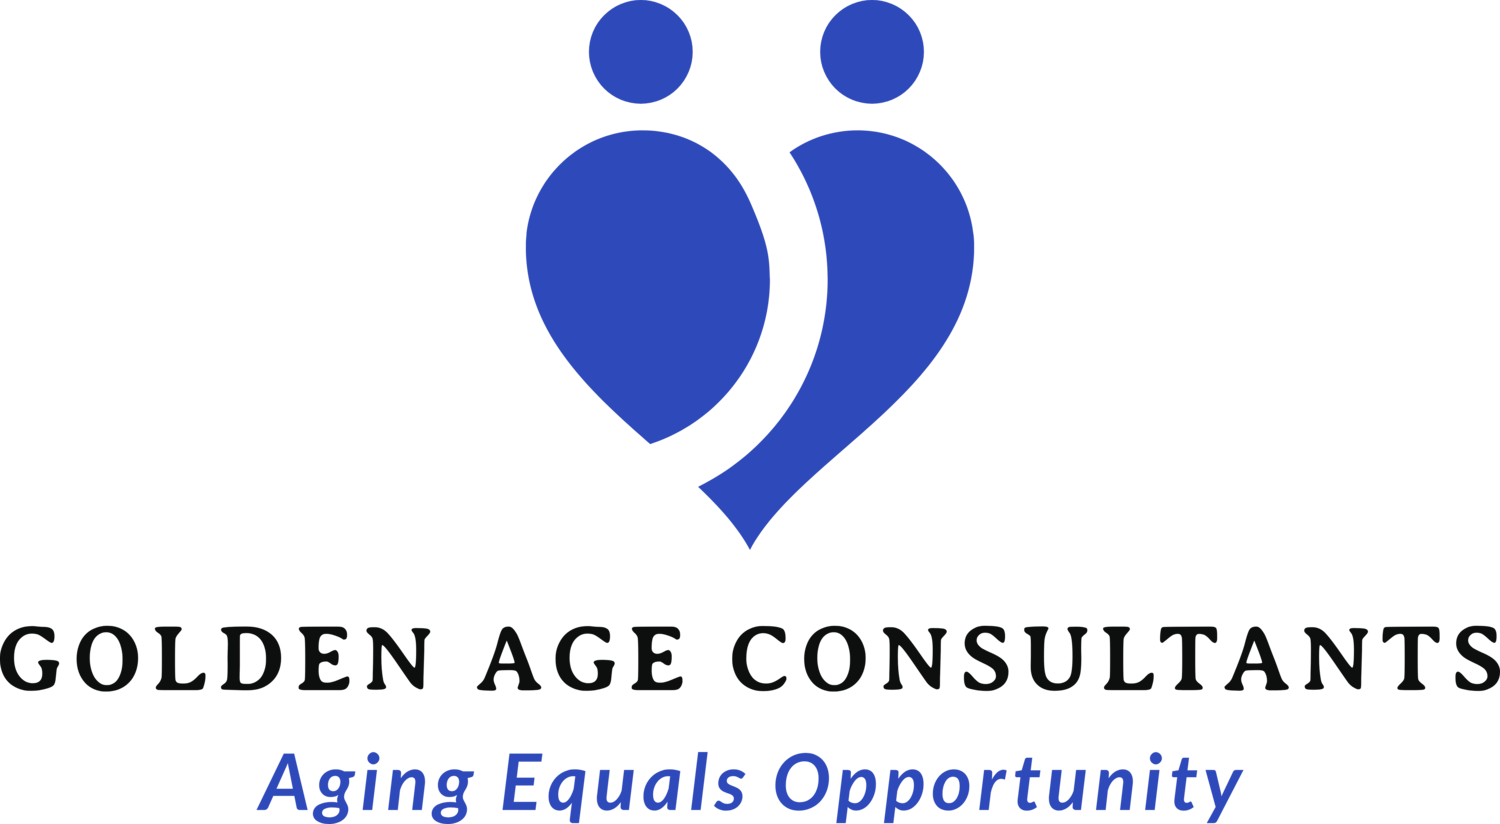 Golden Age Consultants - Promoting Health &amp; Well-being of Aging Adults